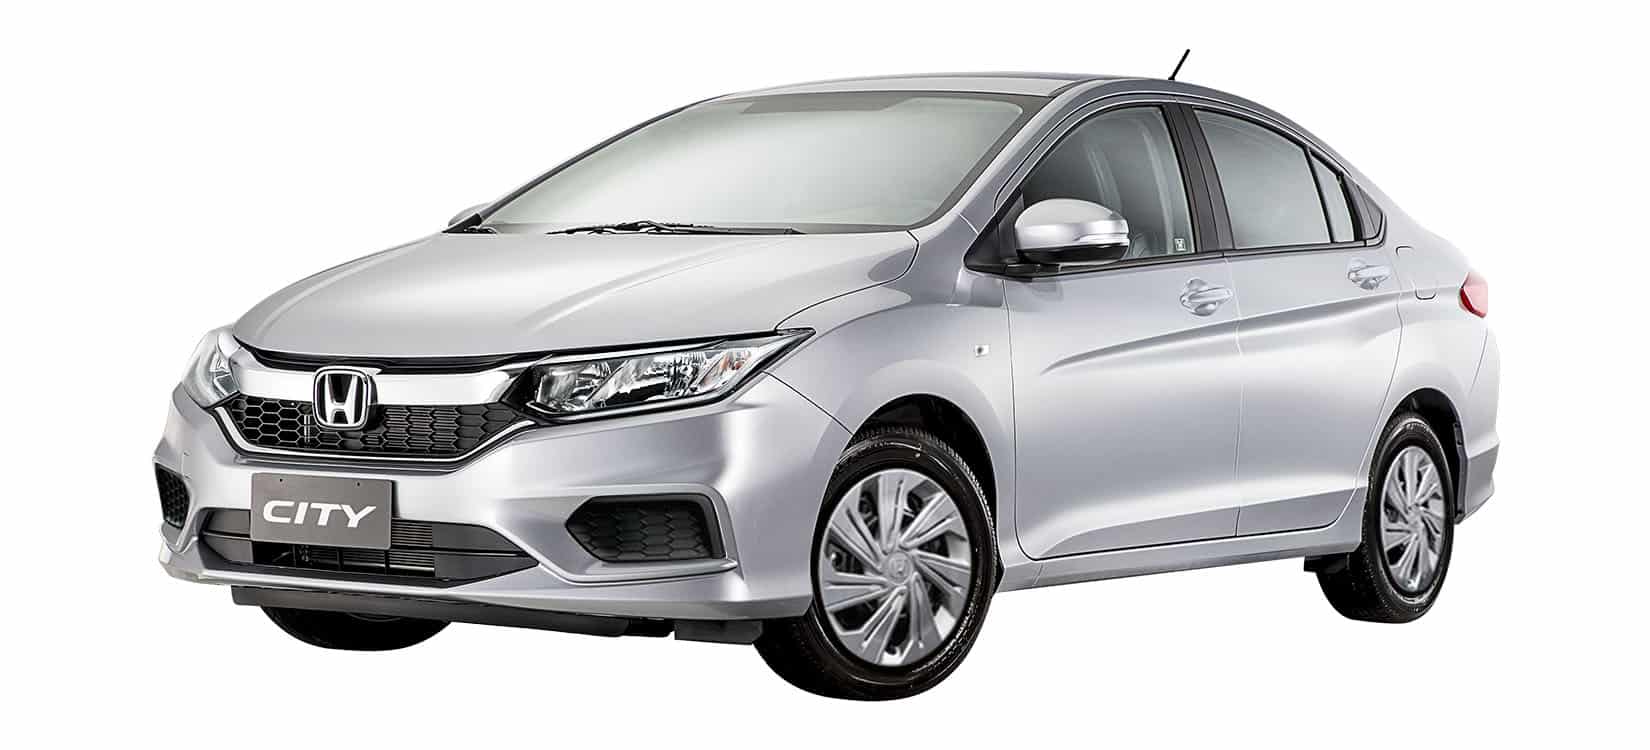 Honda Introduces Its Newest Affordable City Variant, The City 1.5 S CVT 